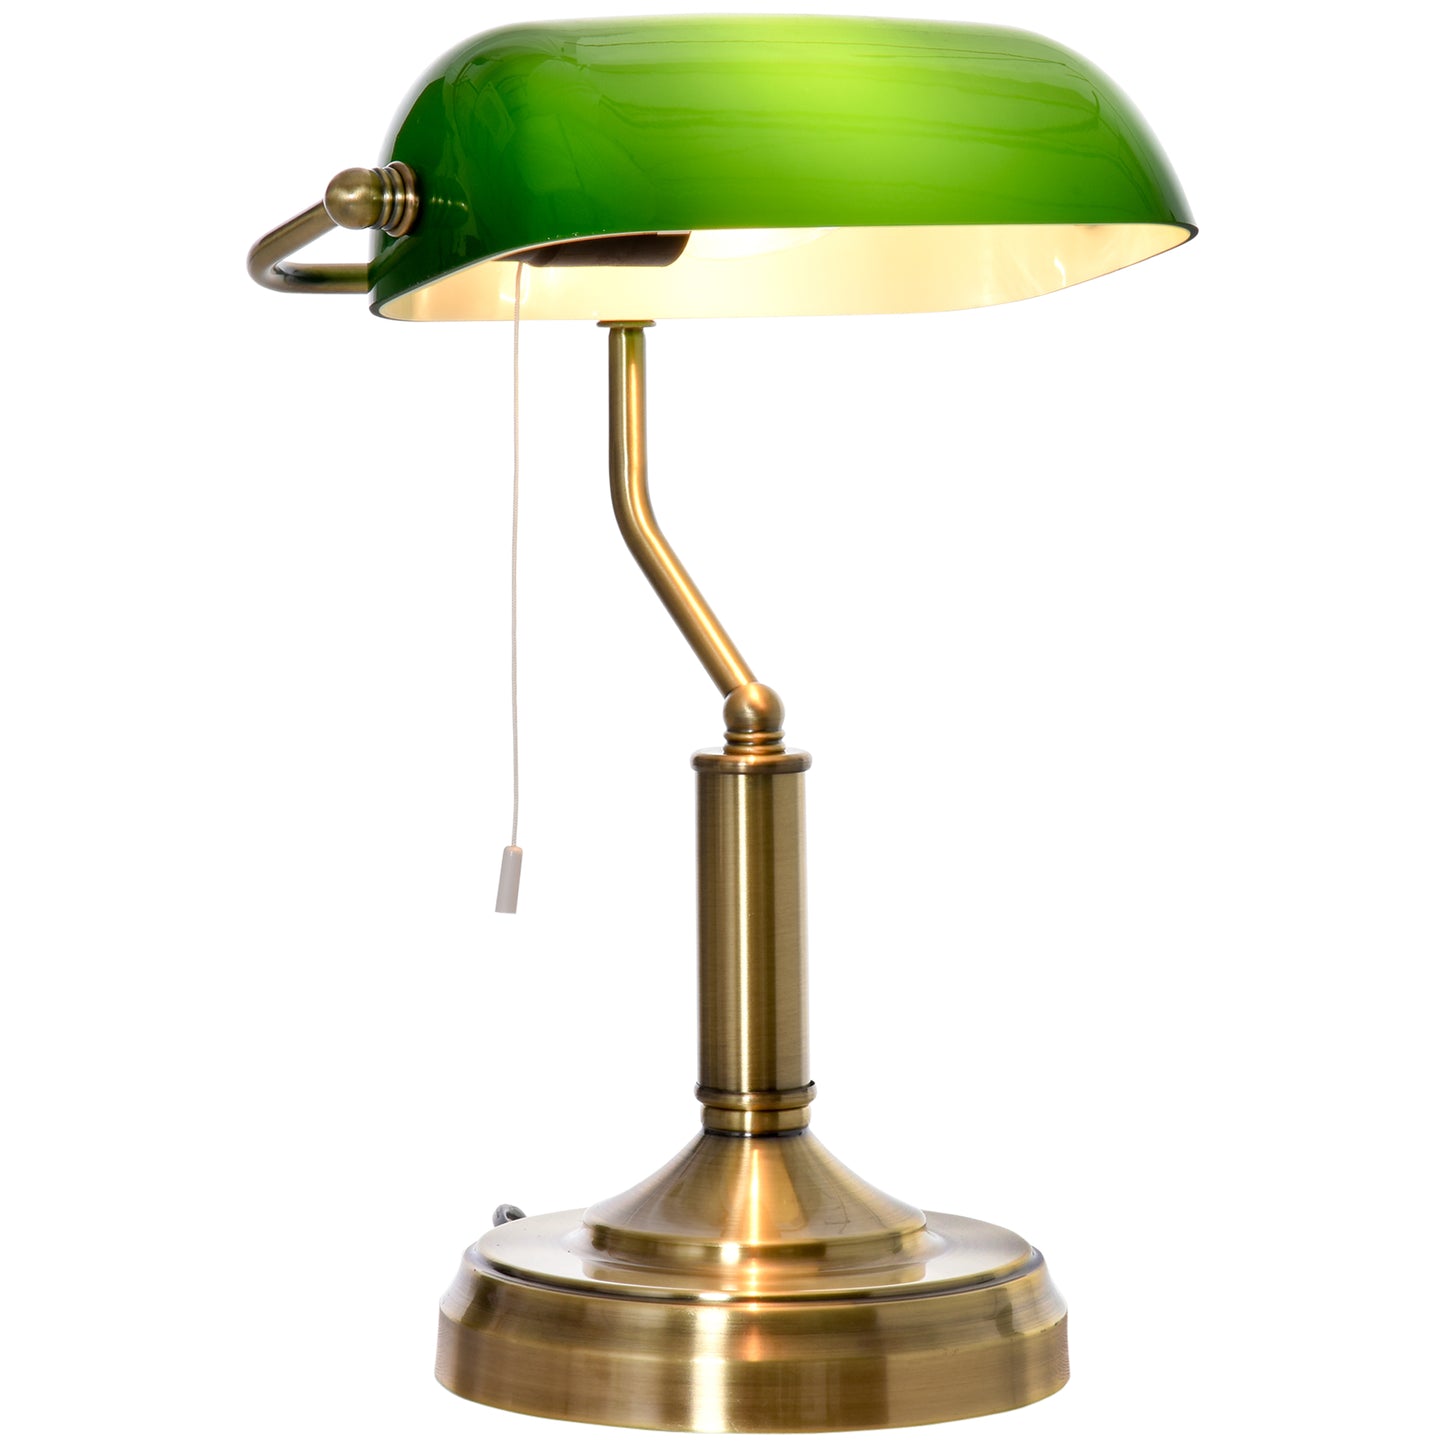 HOMCOM Banker's Table Lamp w/ Antique Bronze Base, Green Glass Shade, Pull Rope Switch